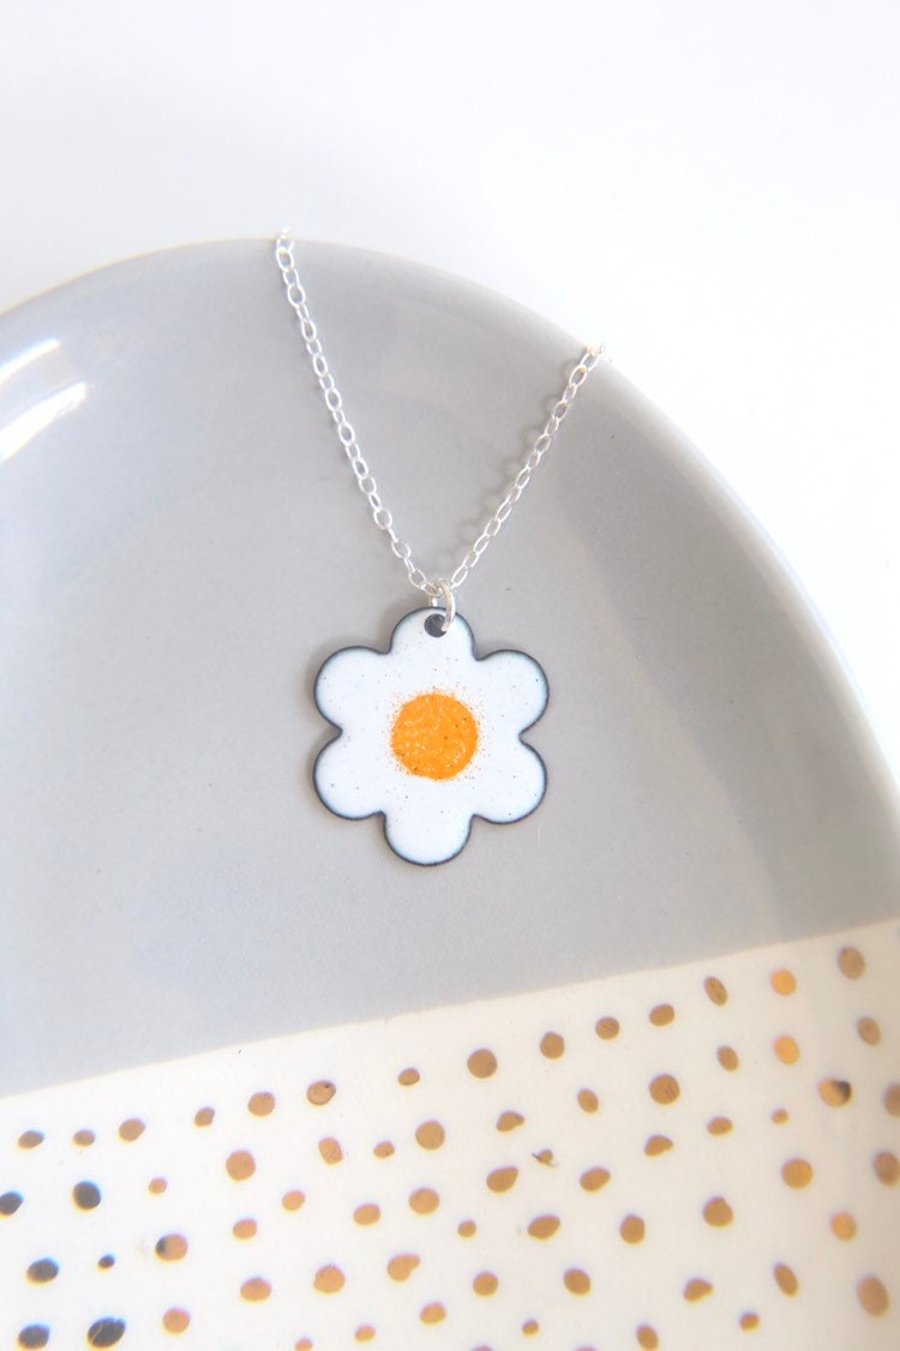 Daisy Necklace with silver chain, white & yellow flower pendant in enamel